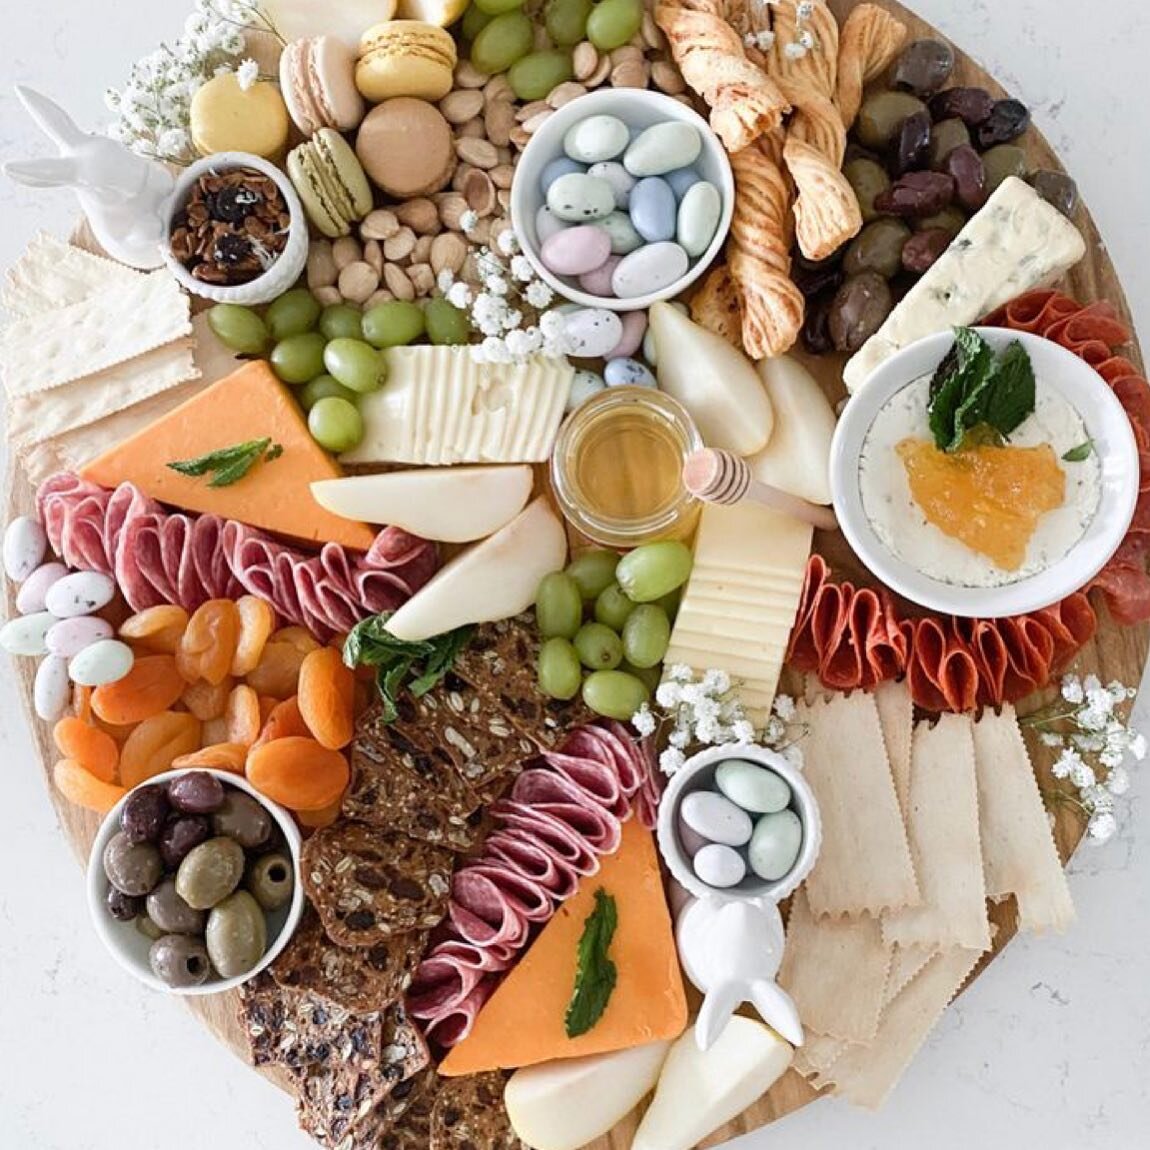 Serve this beautiful east charcuterie board with a western quiche for Easter brunch. A great way to enjoy time together.